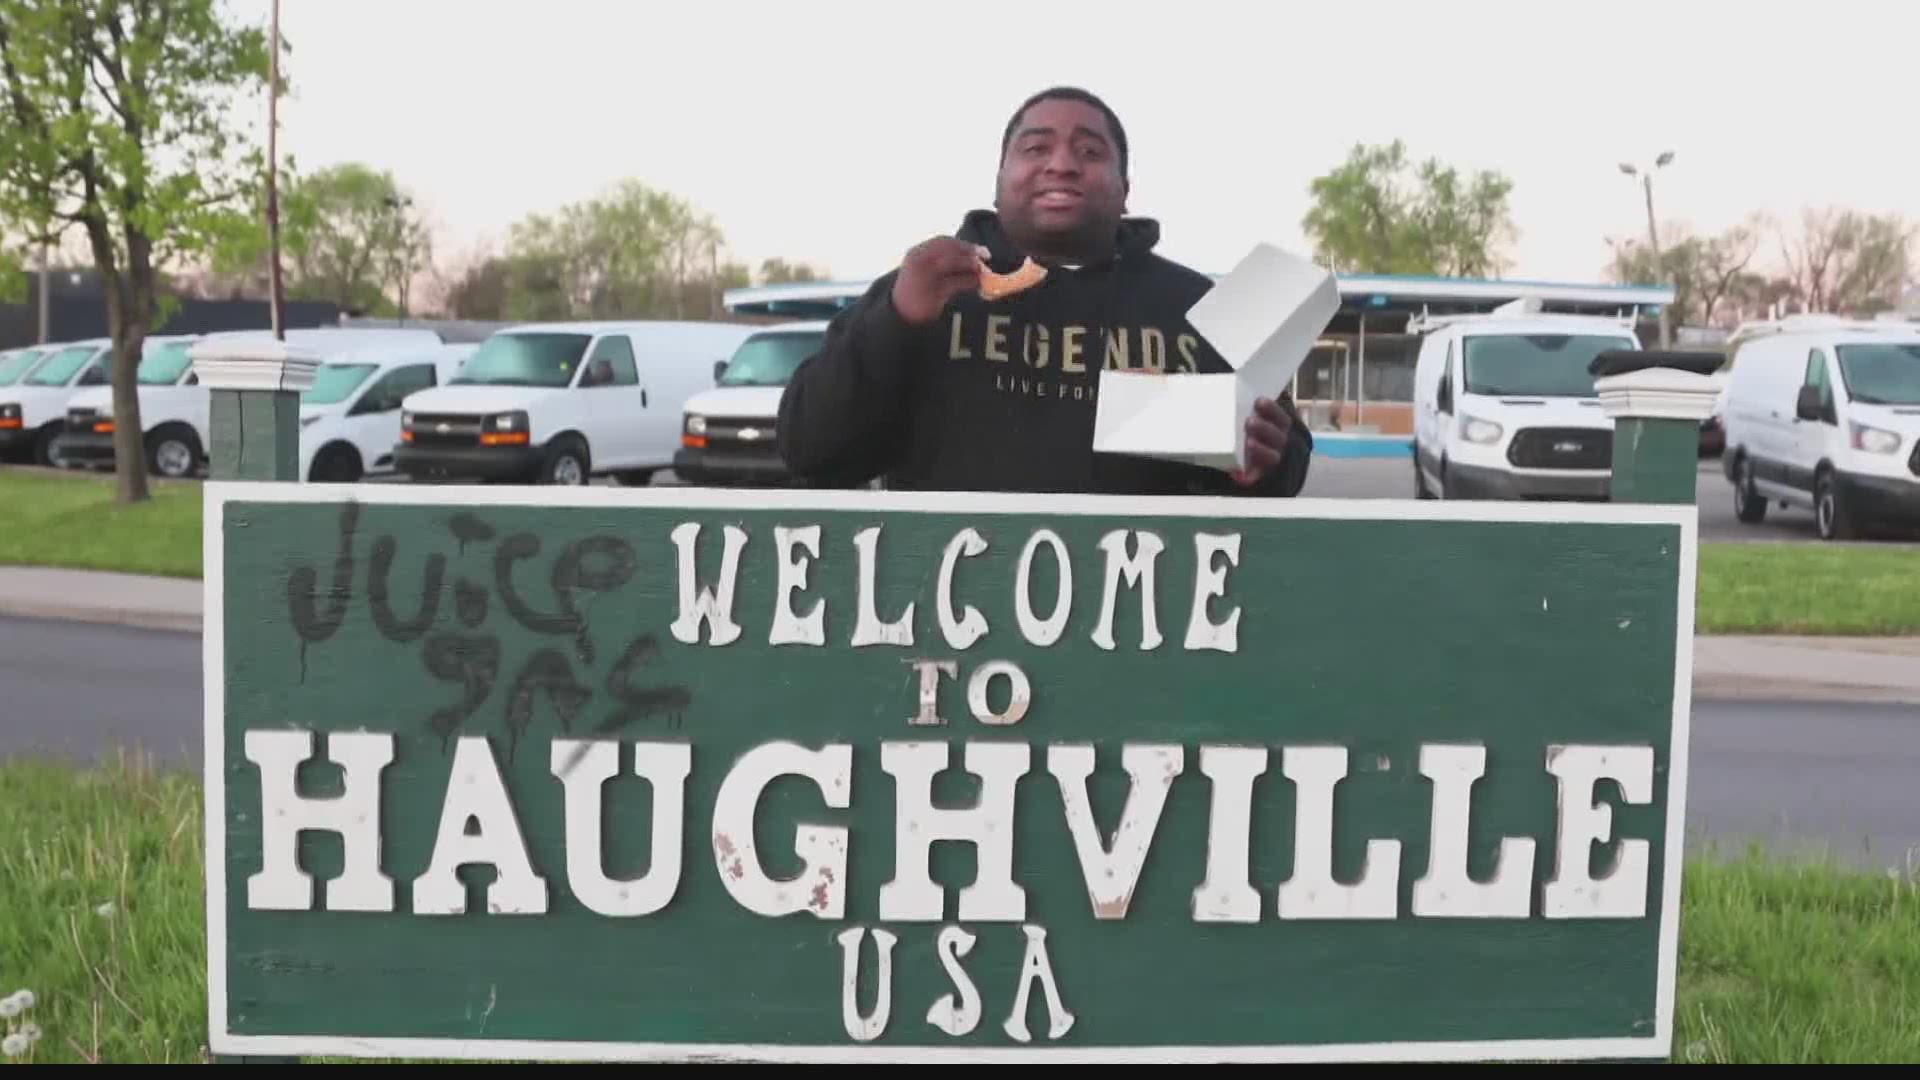 Tevin Studdard is best known for the viral music video he made celebrating Long's Donuts. But he's now using his talents to promote other hometown businesses.